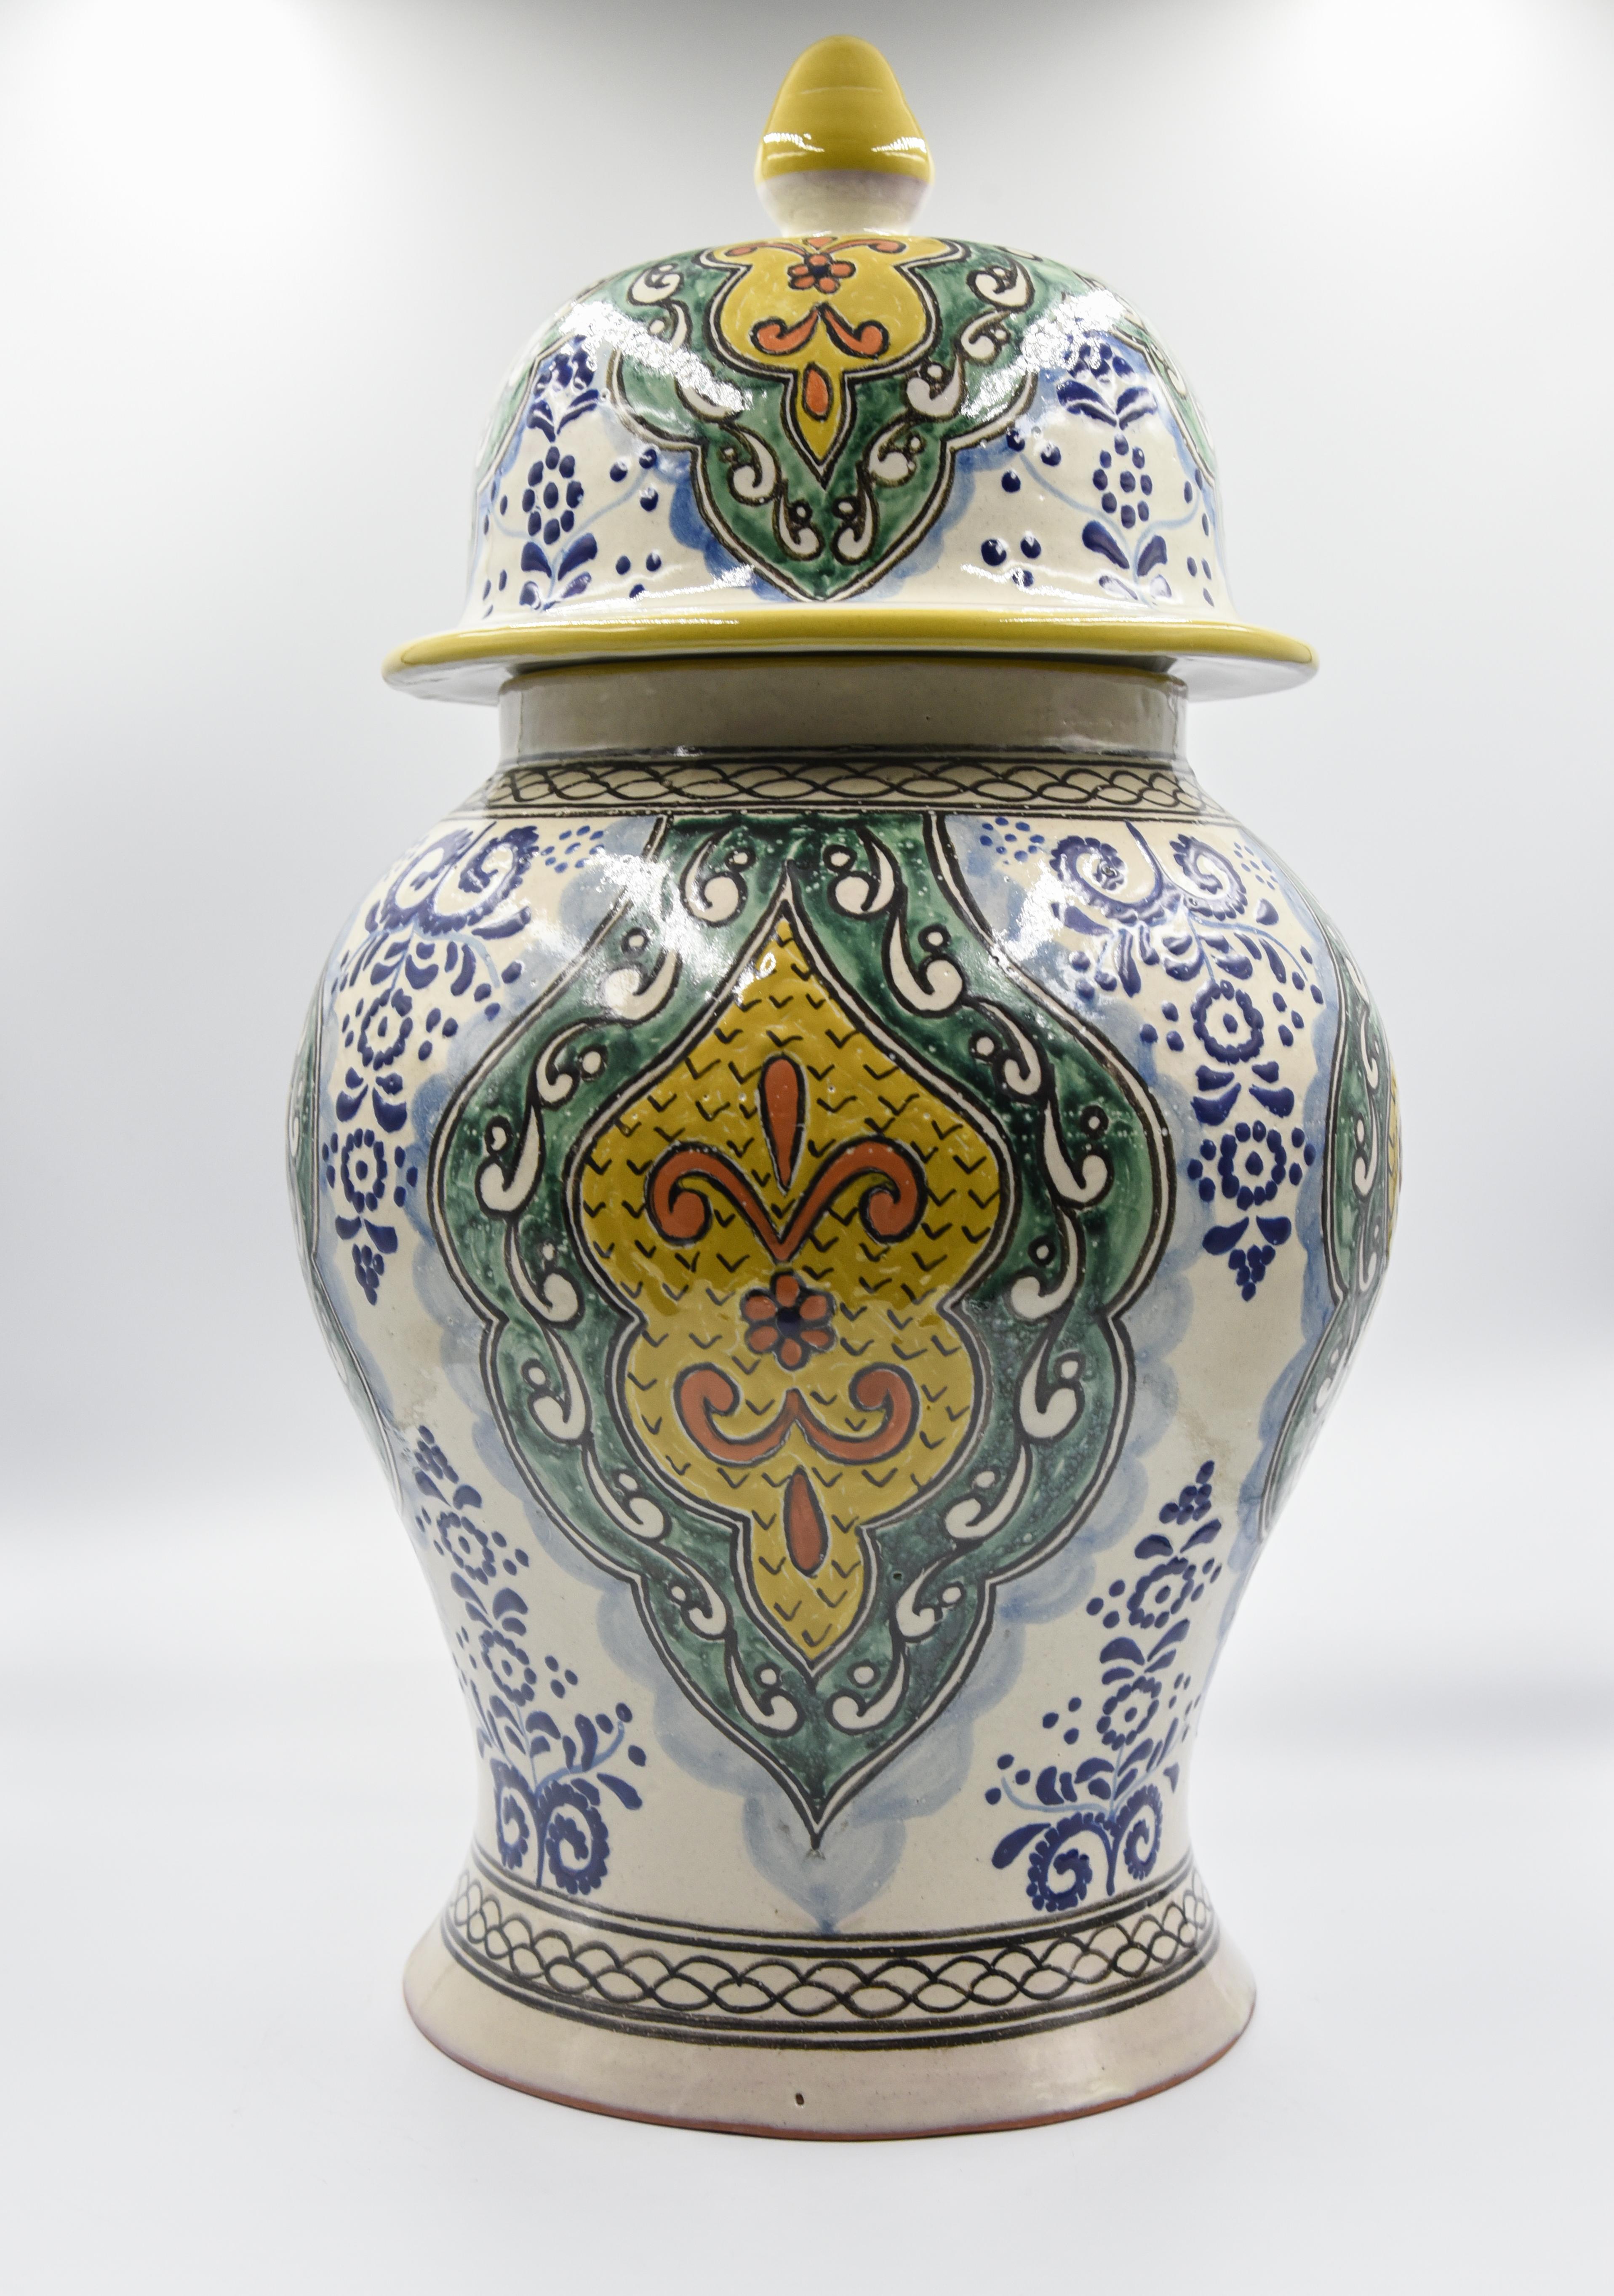 This impressive one of a kind vase is a true representation of Cesar Torres's work. This beautiful vase figure comes with a pointy lid just as a traditional Talavera vase. Its texture and design are however a mixture of colonial and contemporary